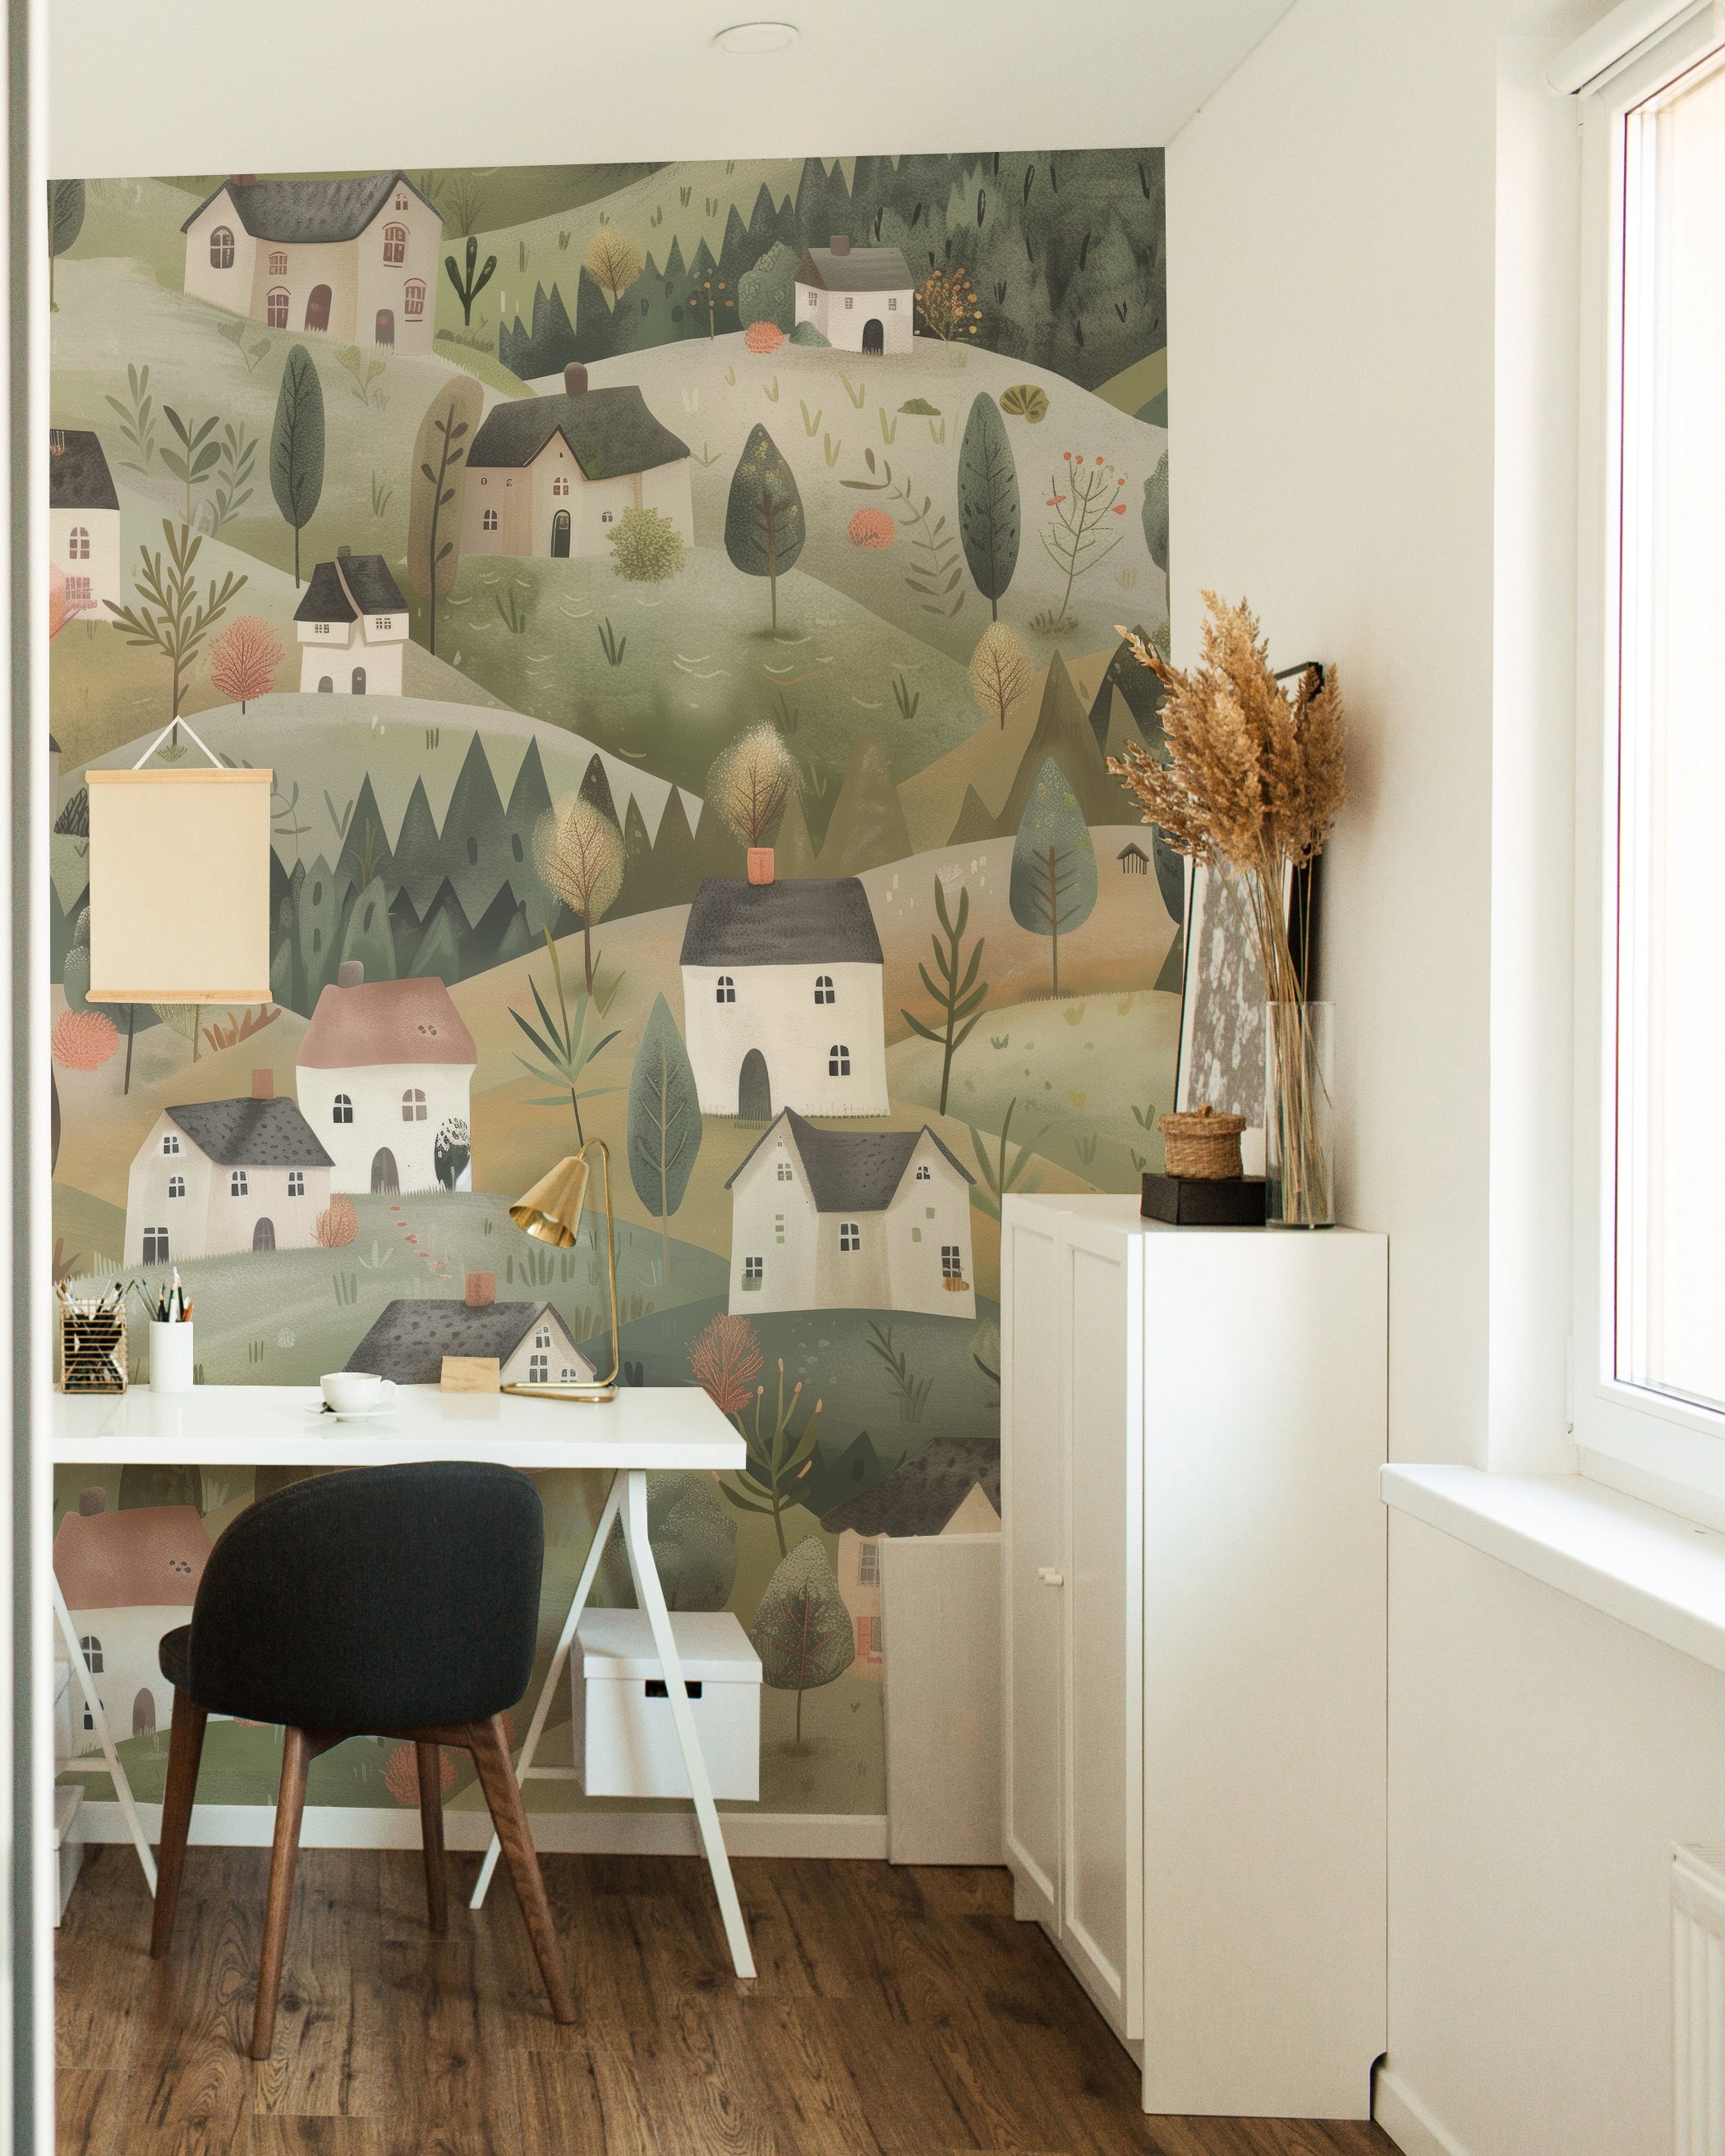  Hillier Mural wallpaper installed in a room, creating a serene countryside atmosphere with houses and greenery.